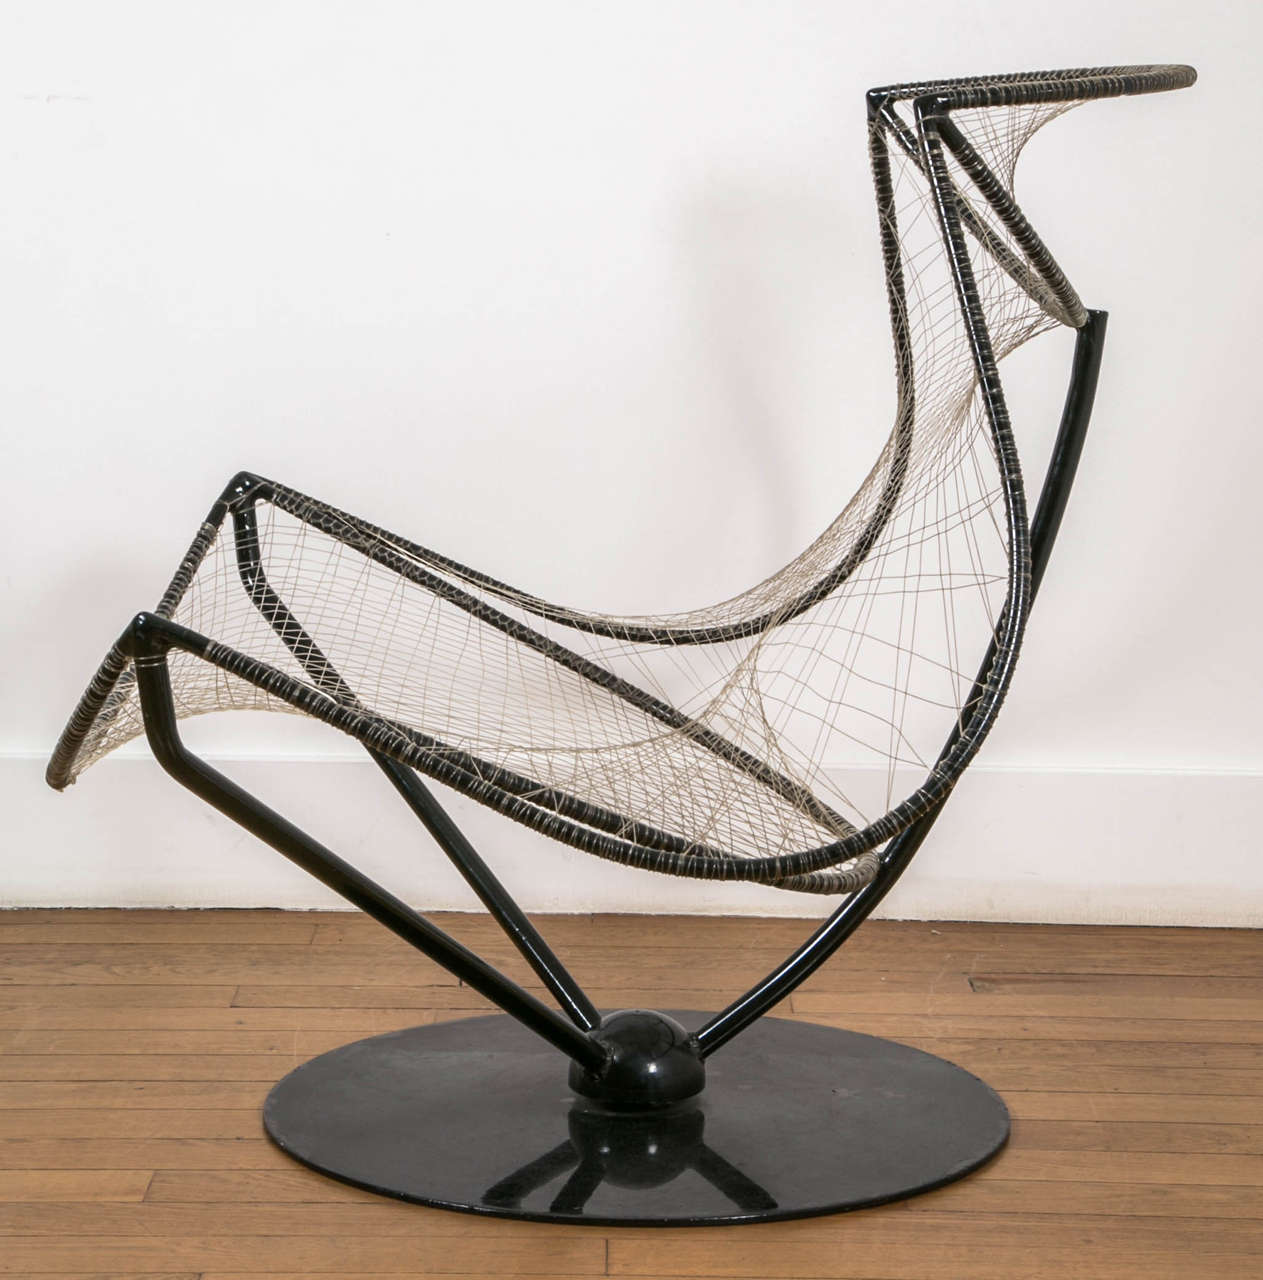 Italian String Chair by Conti Forlani and Grassi for Paoli, Designed in 1962